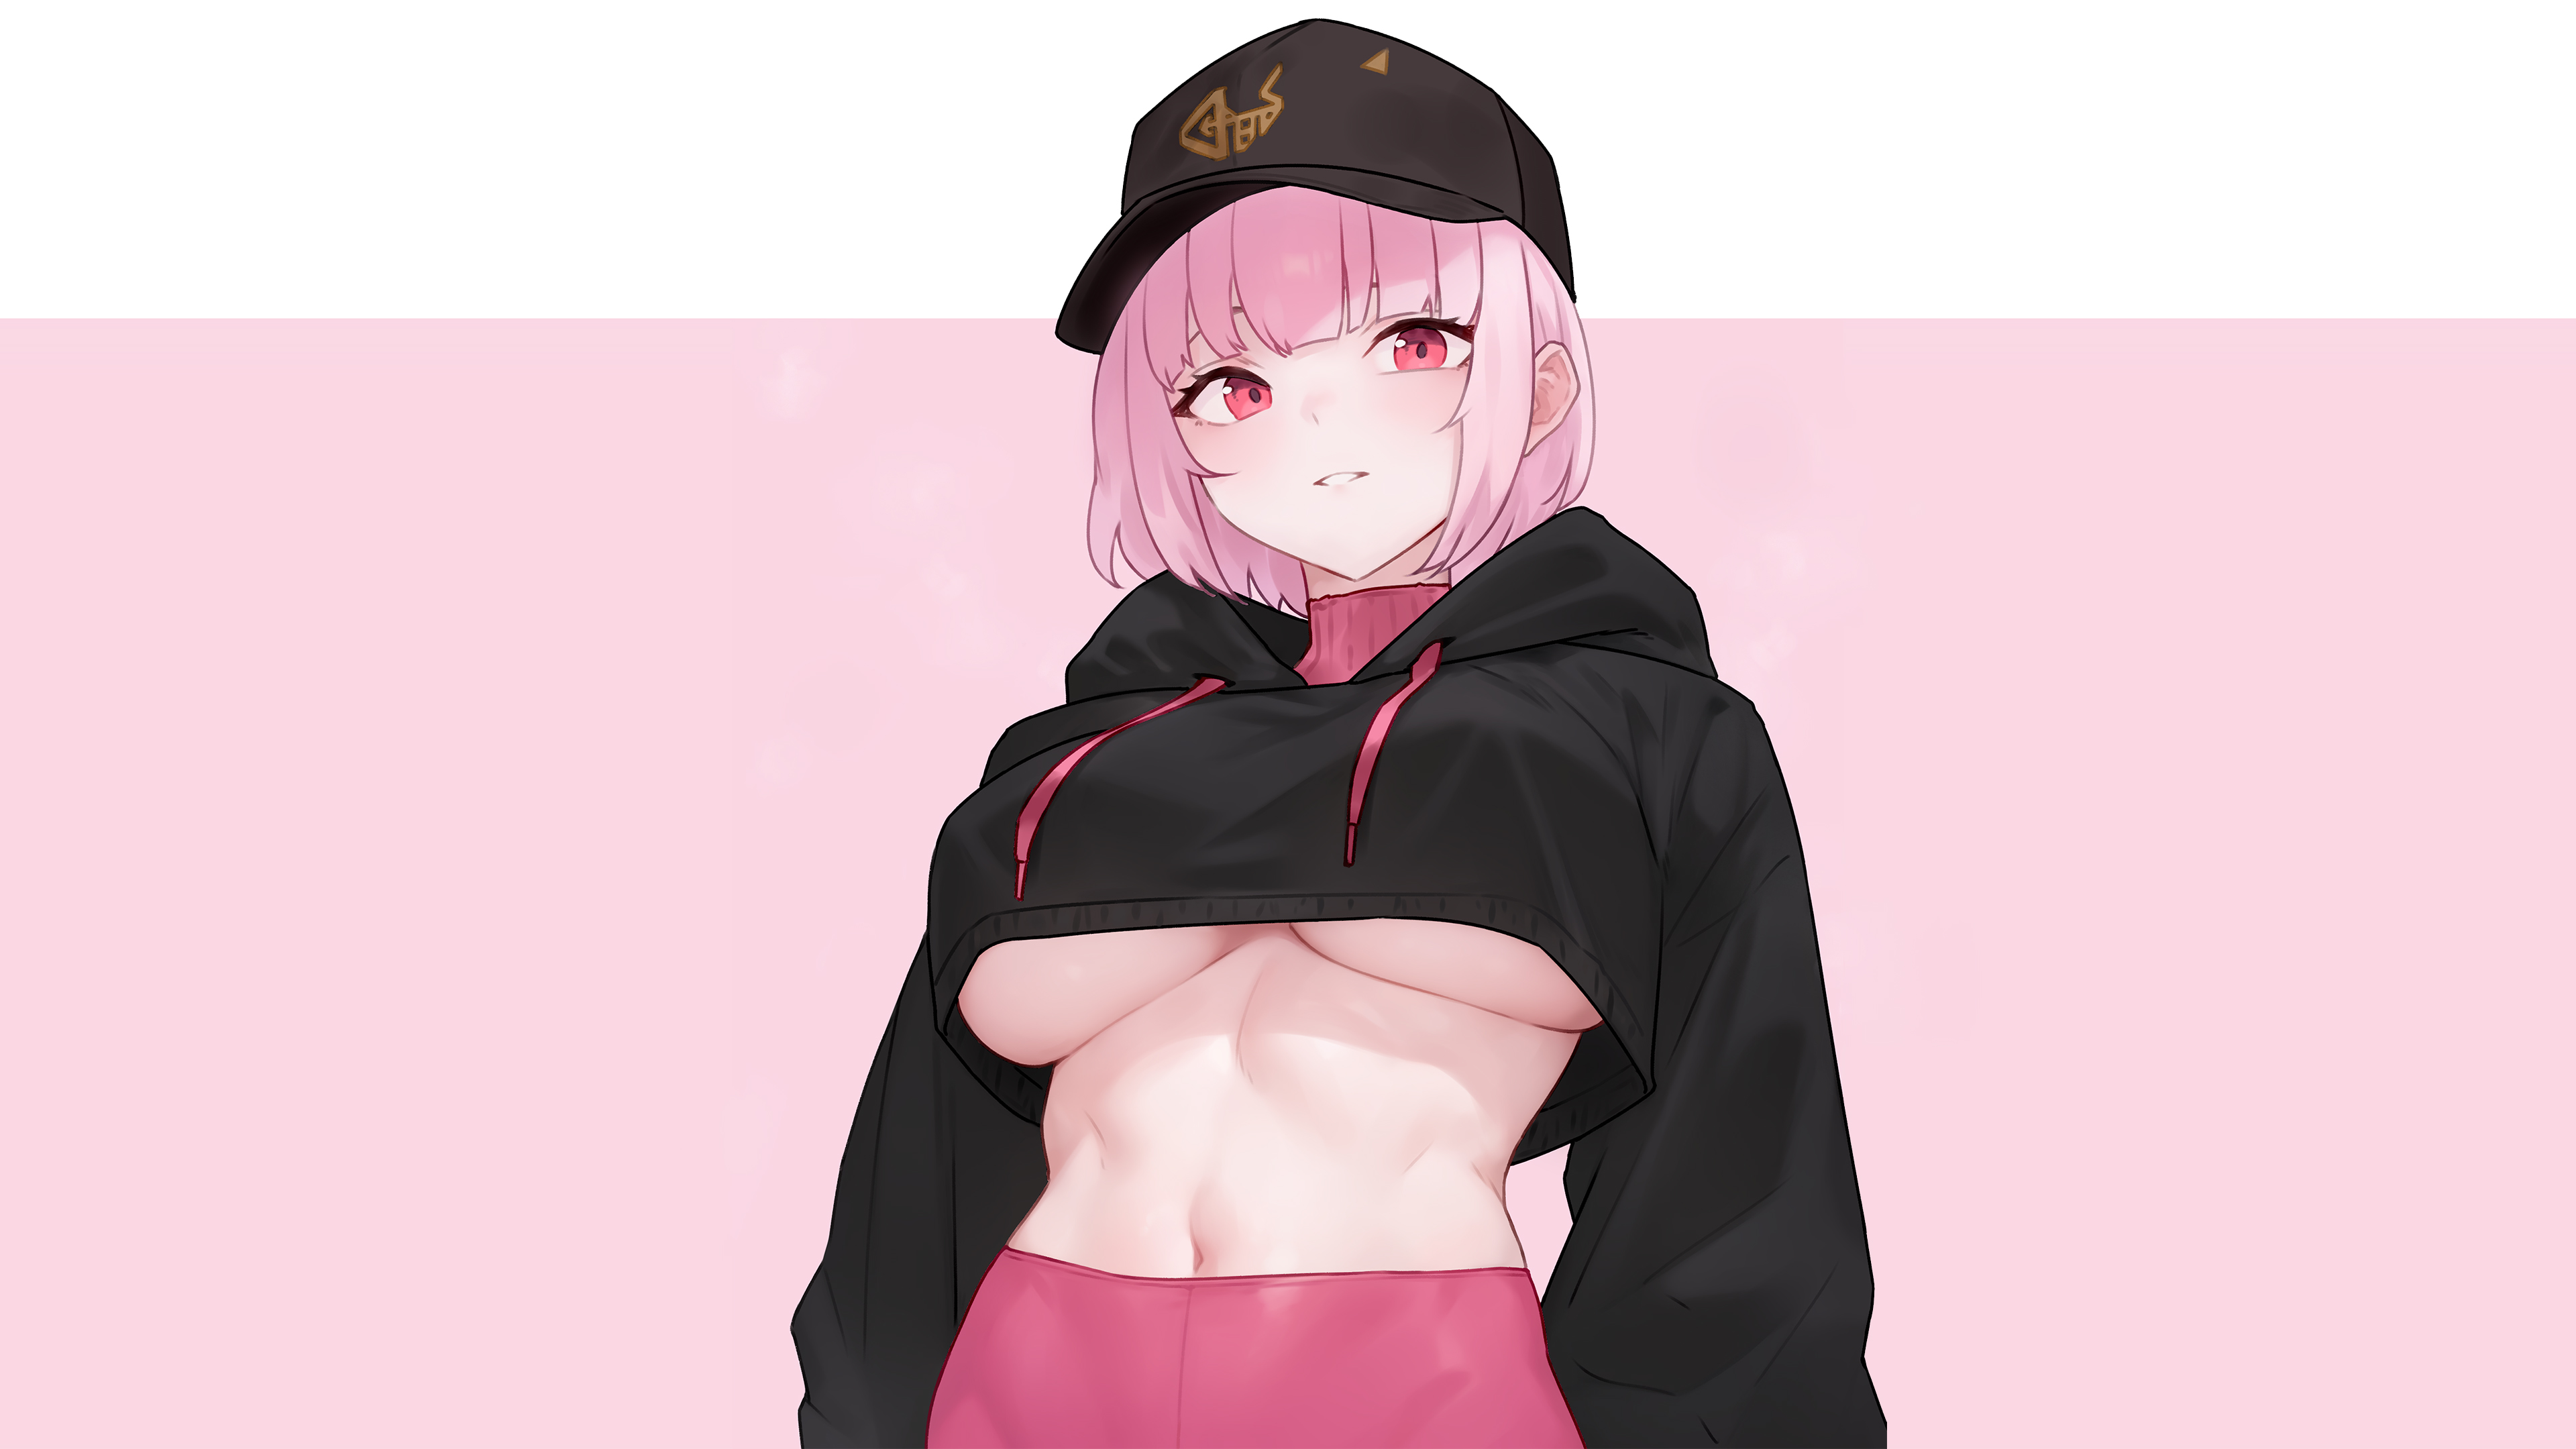 Anime 3840x2160 bluefield Mori Calliope Hololive Hololive English Virtual Youtuber anime anime girls pink hair short hair pink eyes black hat black hoodie underboob boobs bare midriff belly button innie navel abs looking at viewer simple background pink background fan art artwork digital art 2D